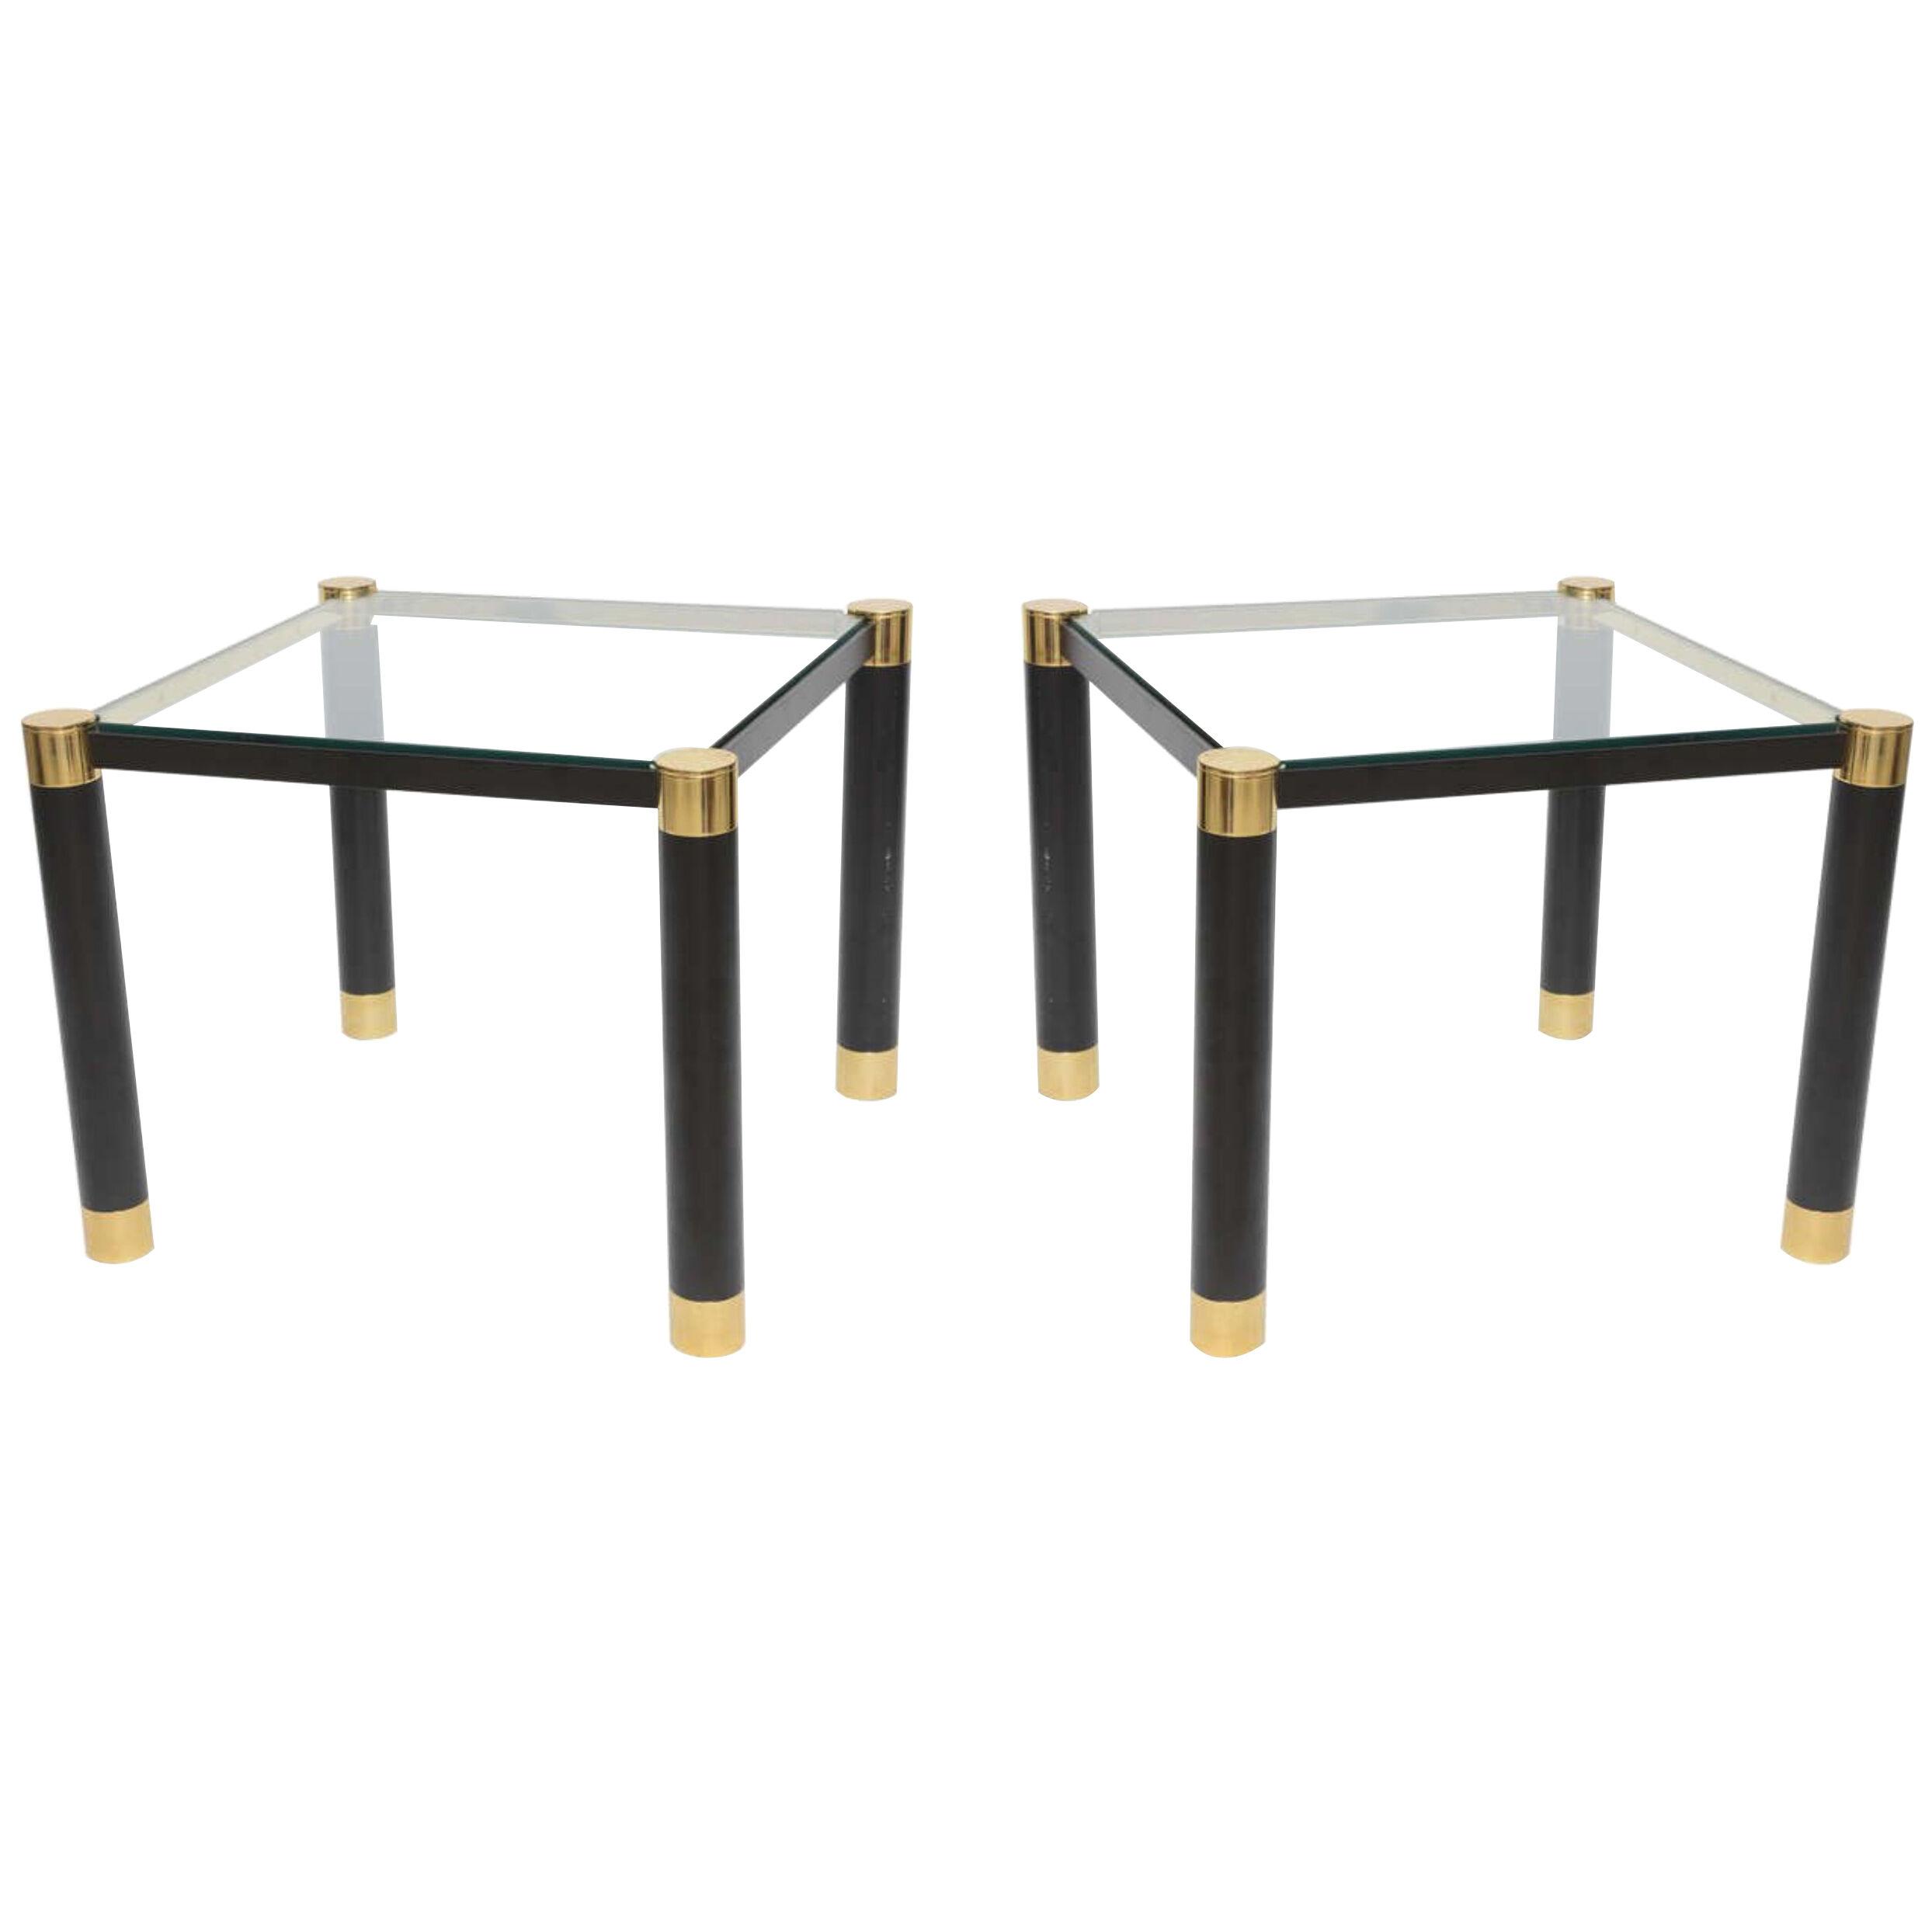 Pair of American Modern Brass and Ebonized Glass Top Tables, Karl Springer